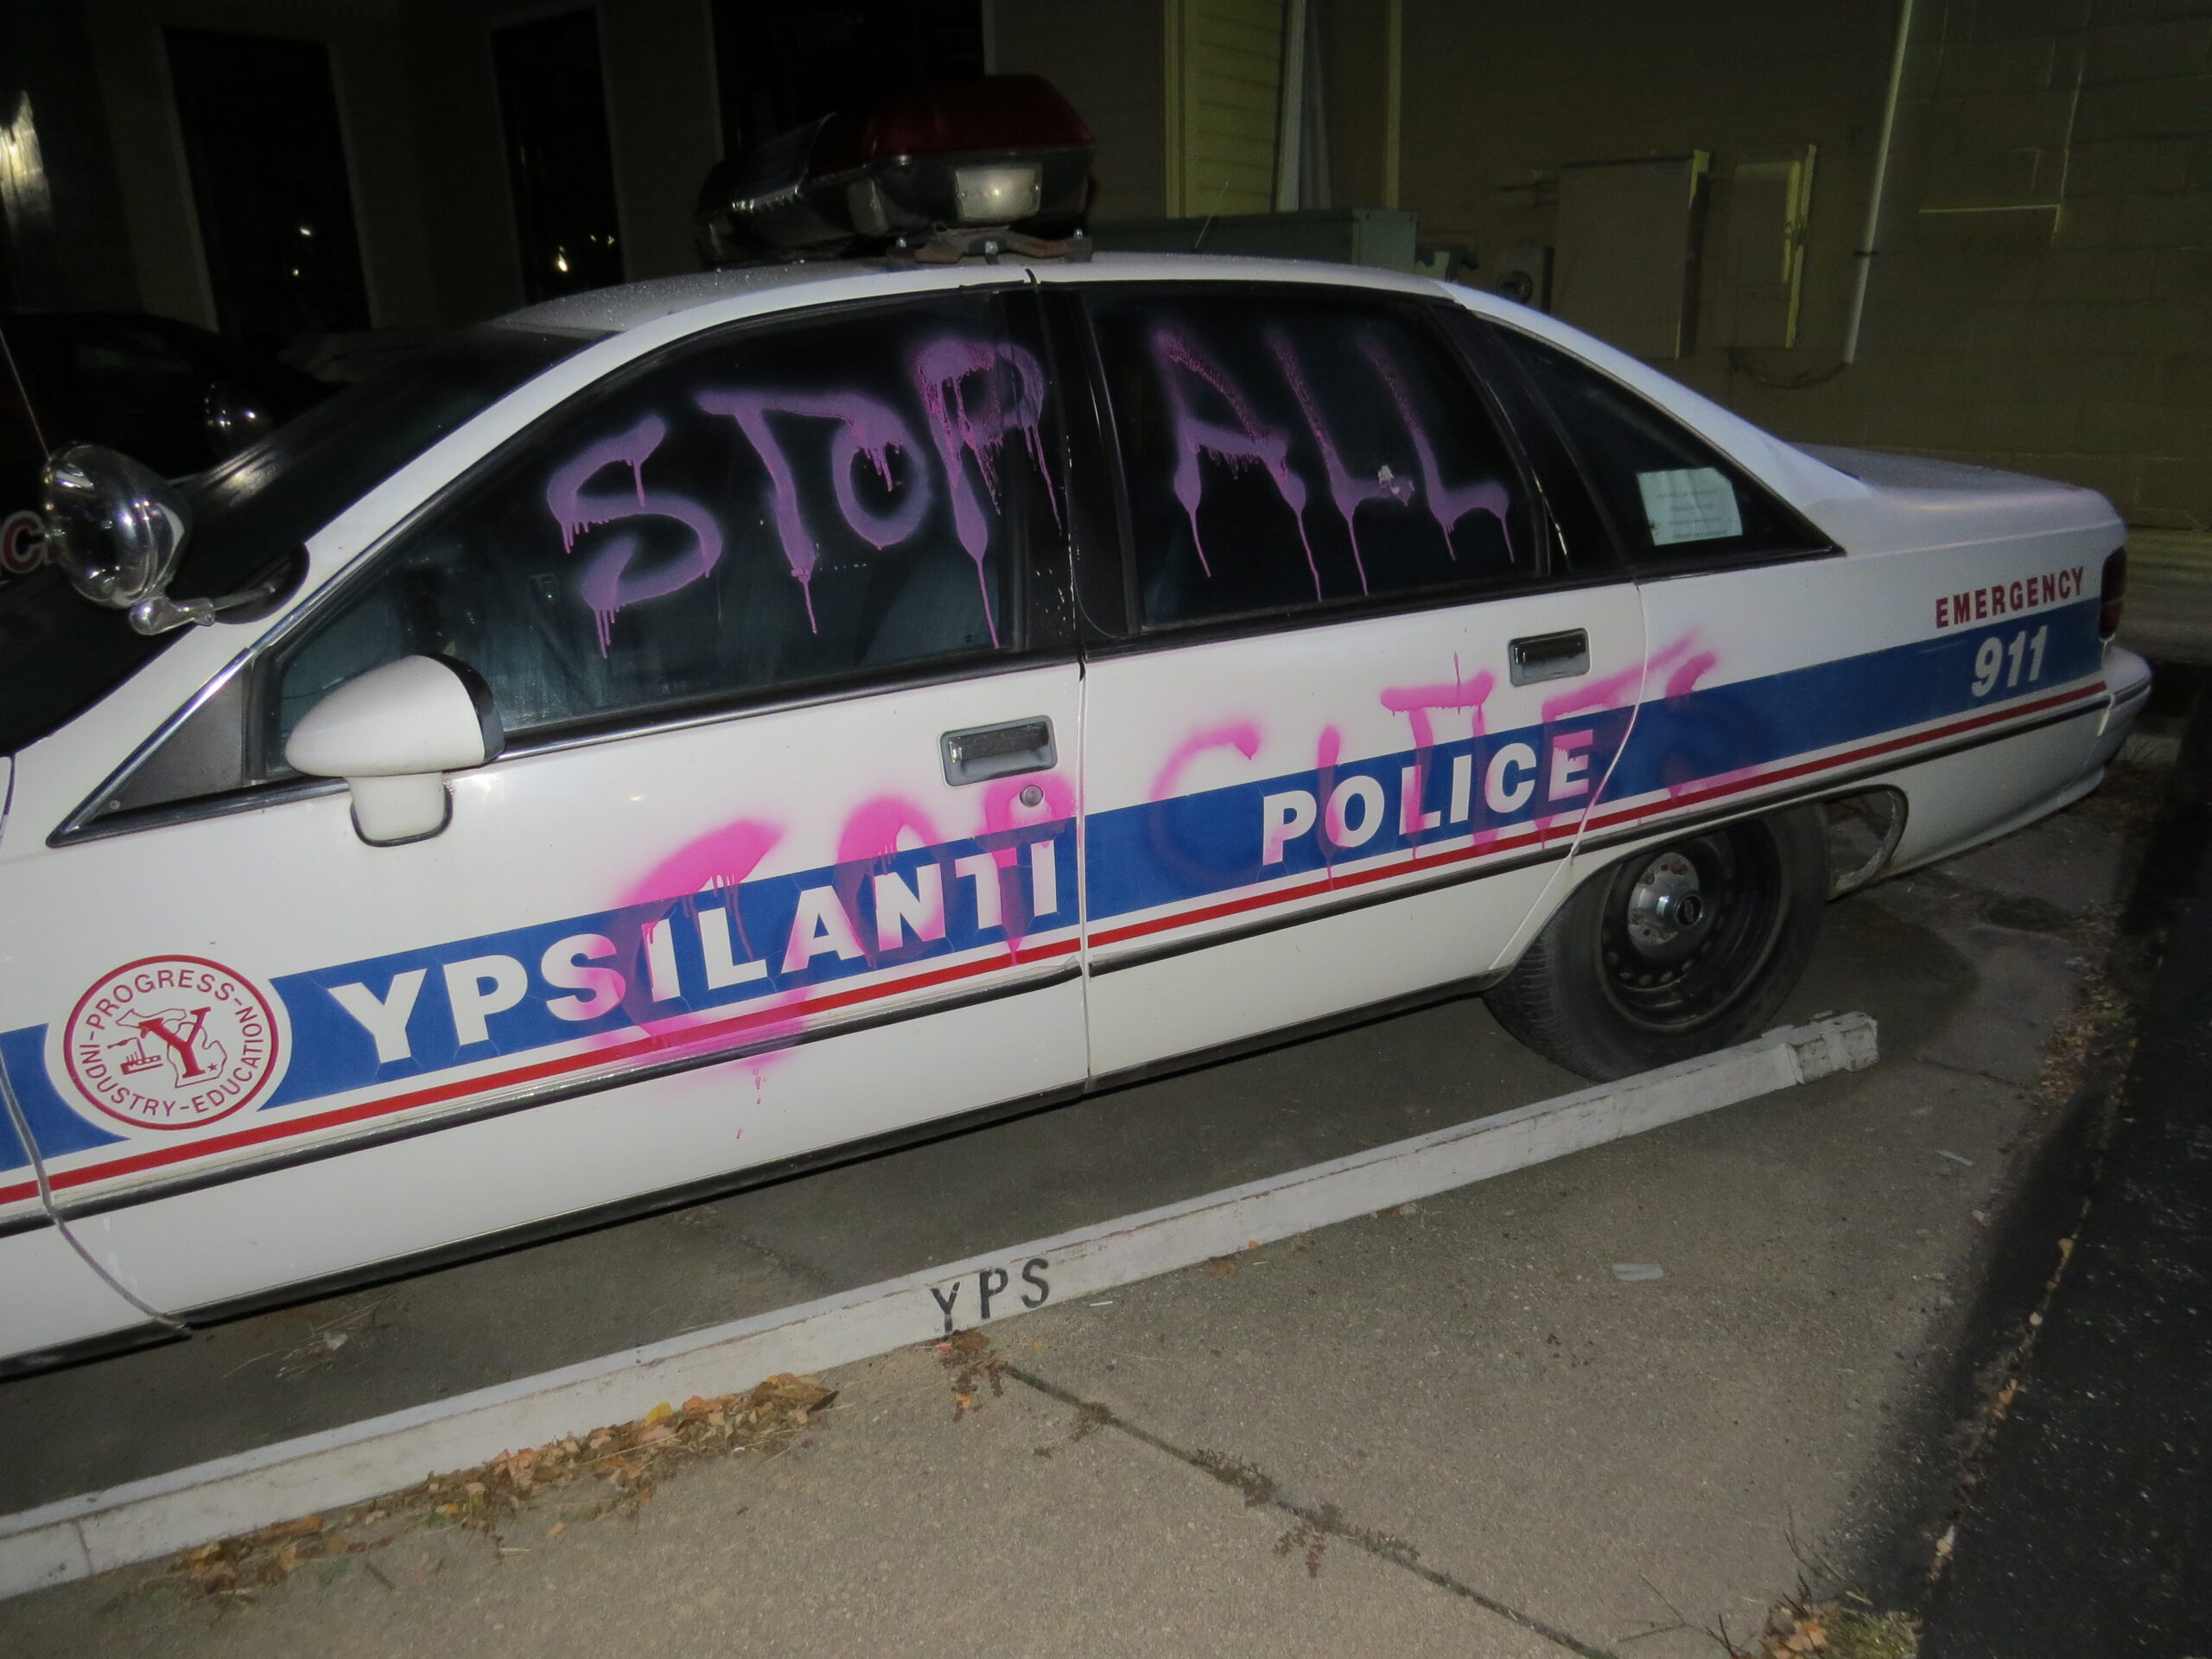 A Ypsilanti police car is spray painted "STOP ALL COP CITIES" on the side in pink spray paint.